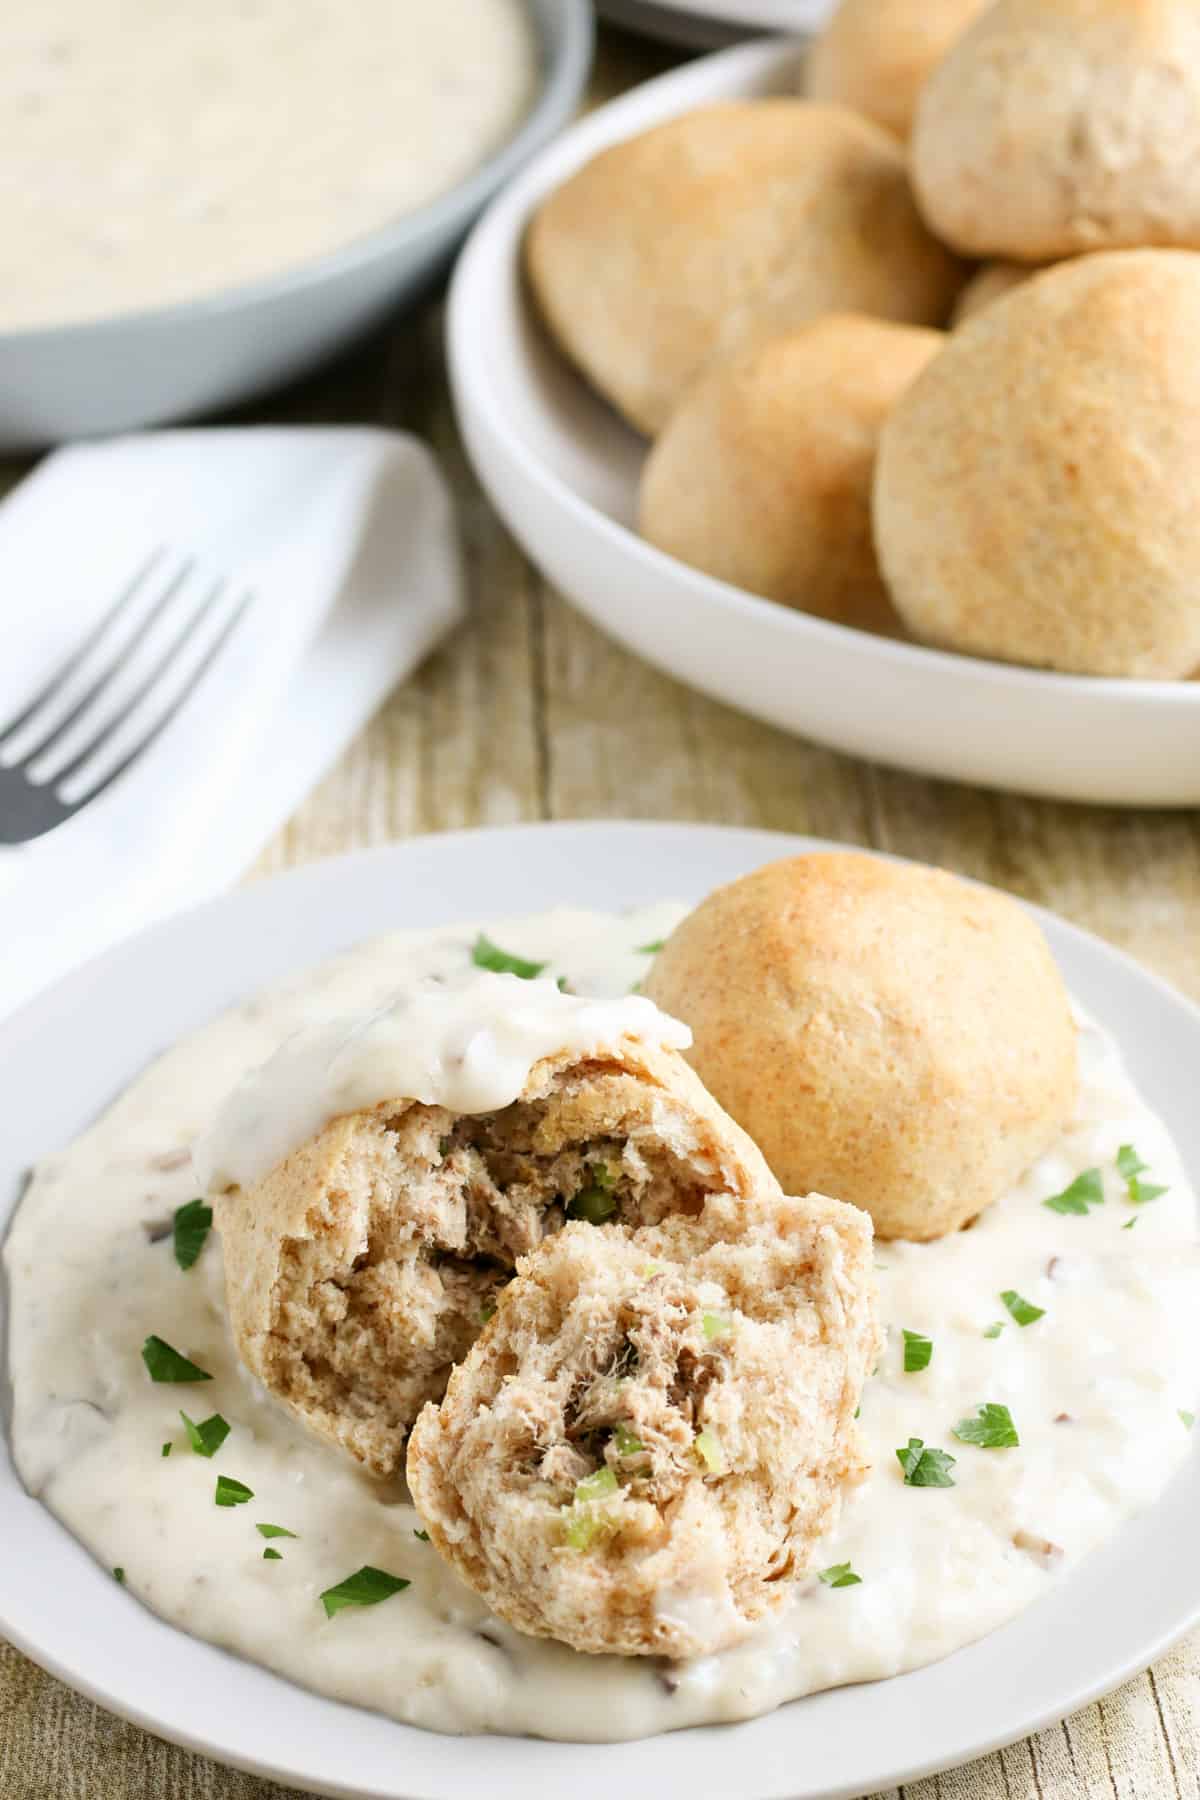 Tuna fish mixture wrapped in a baking powder biscuit on plate withe creamy mushroom gravy sprinkled with green parsley and bowl of pockets and fork in background.